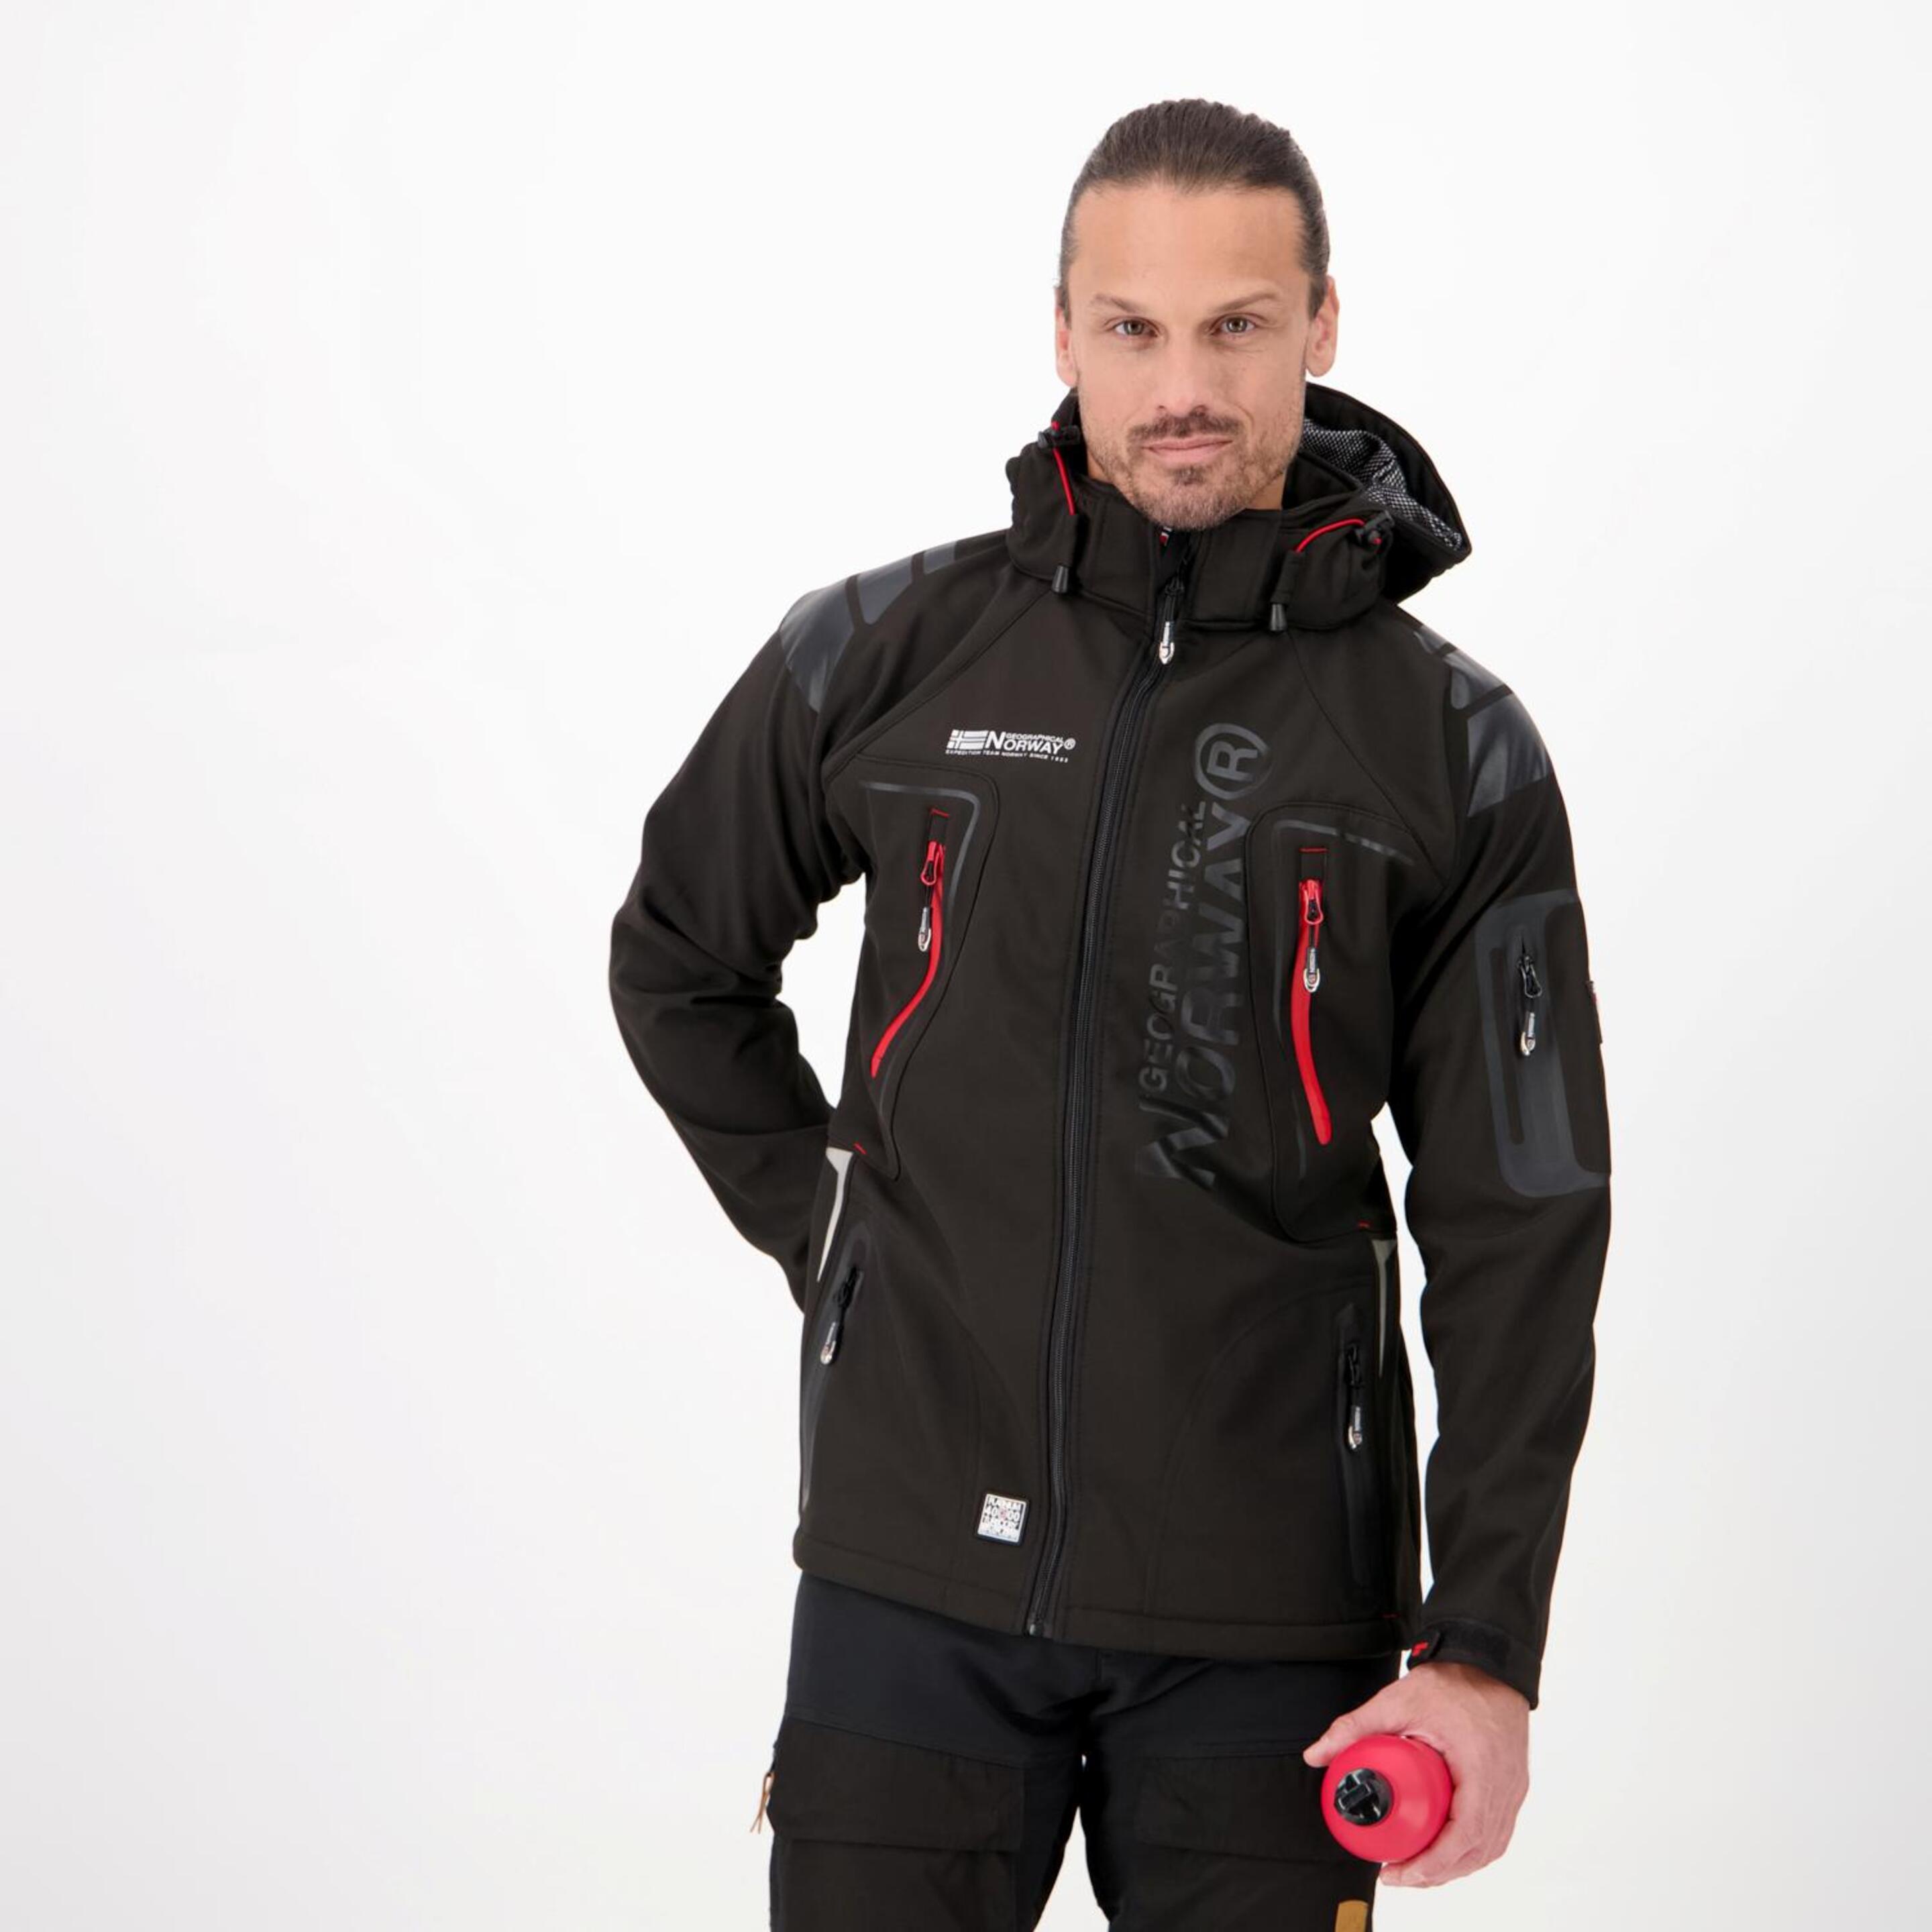 Geographical Norway Techno